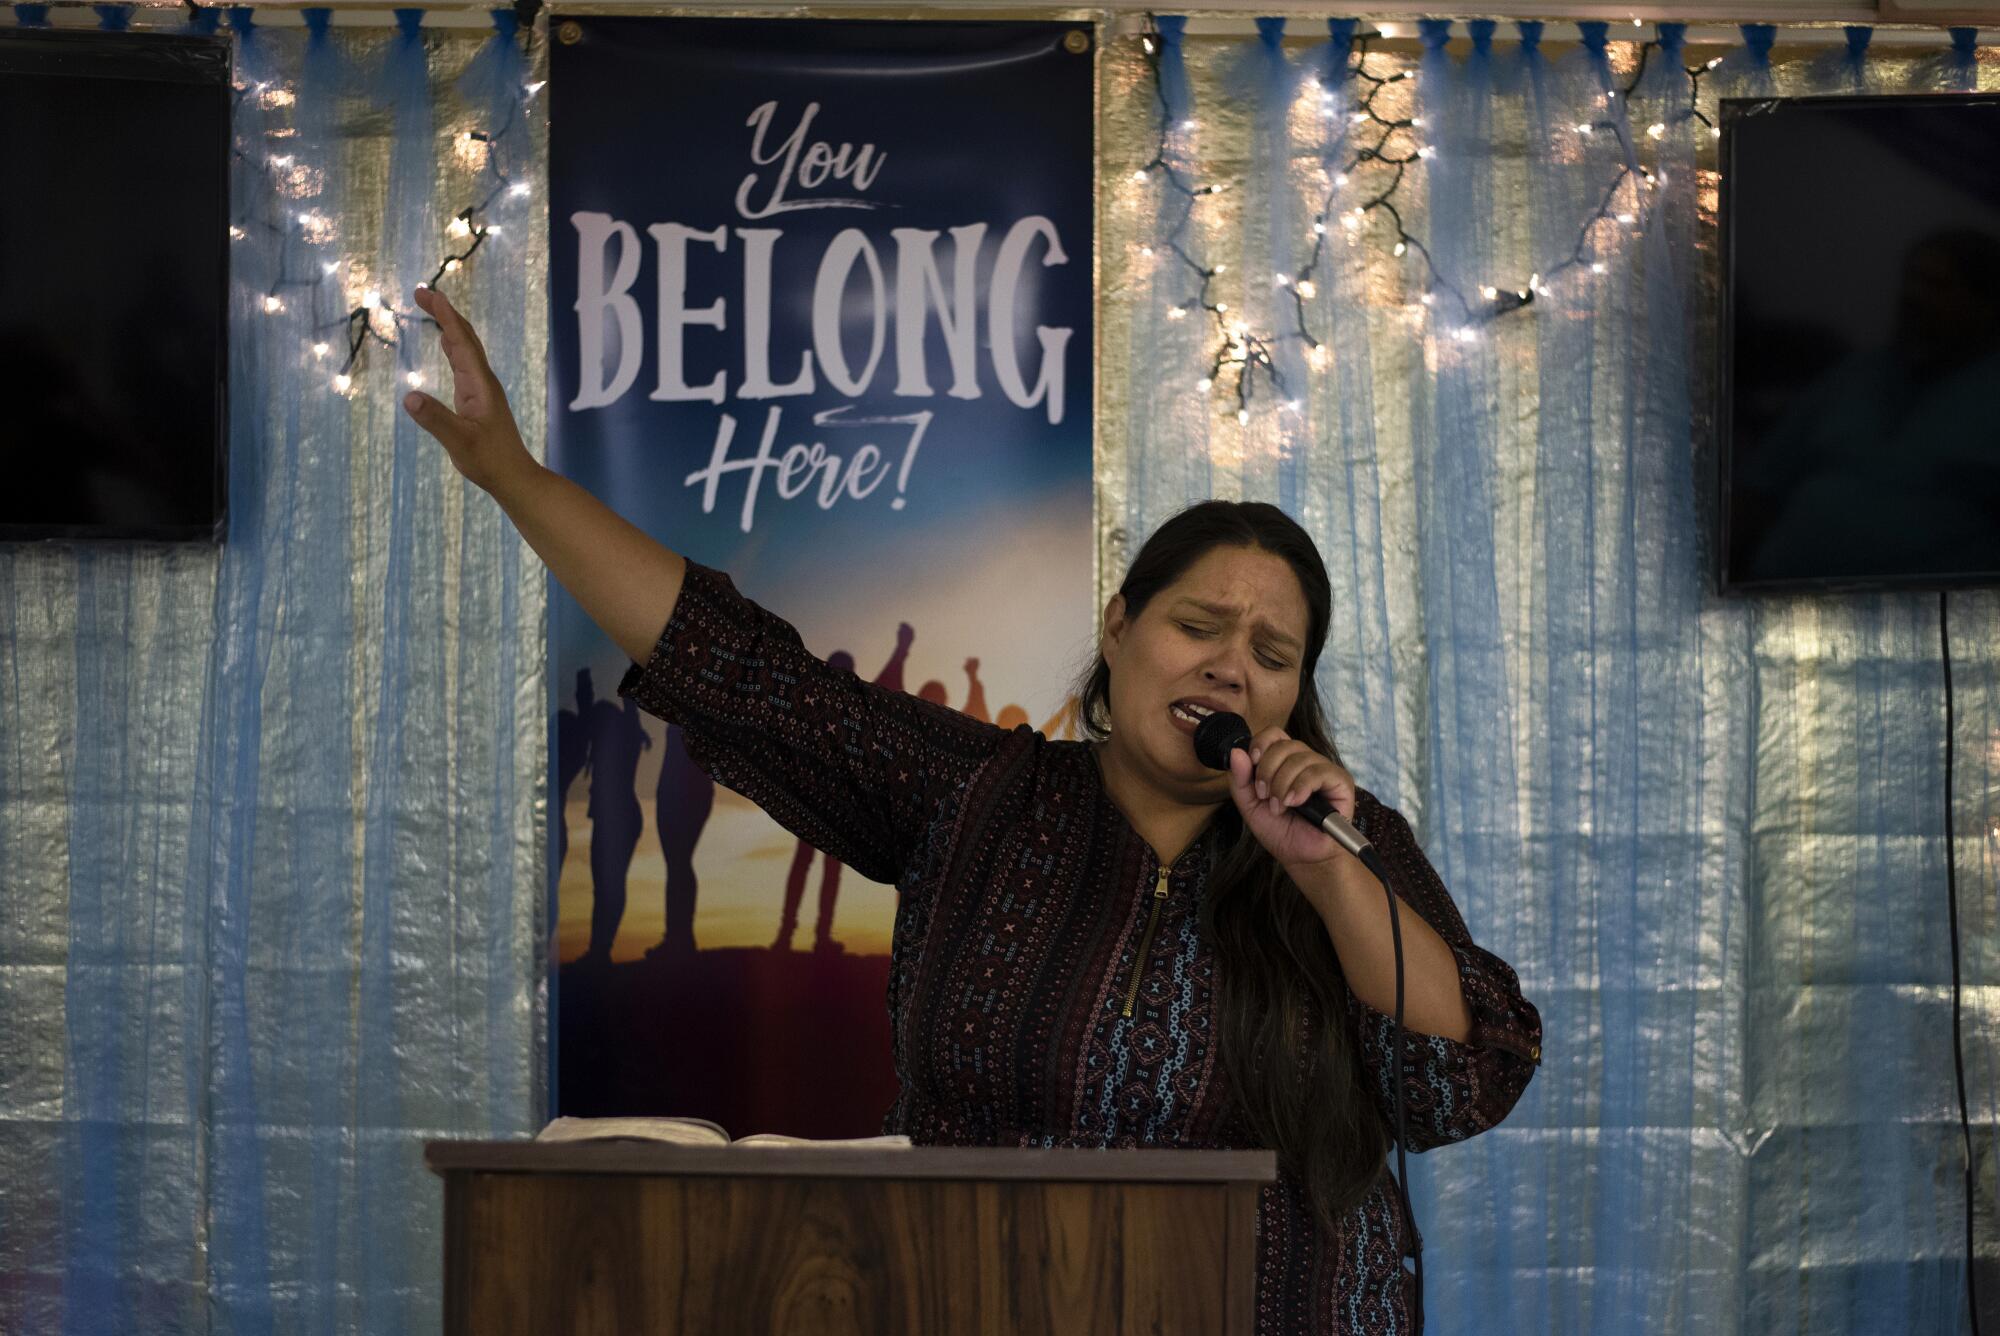 Silva preaches to the congregation at the small community church she leads.